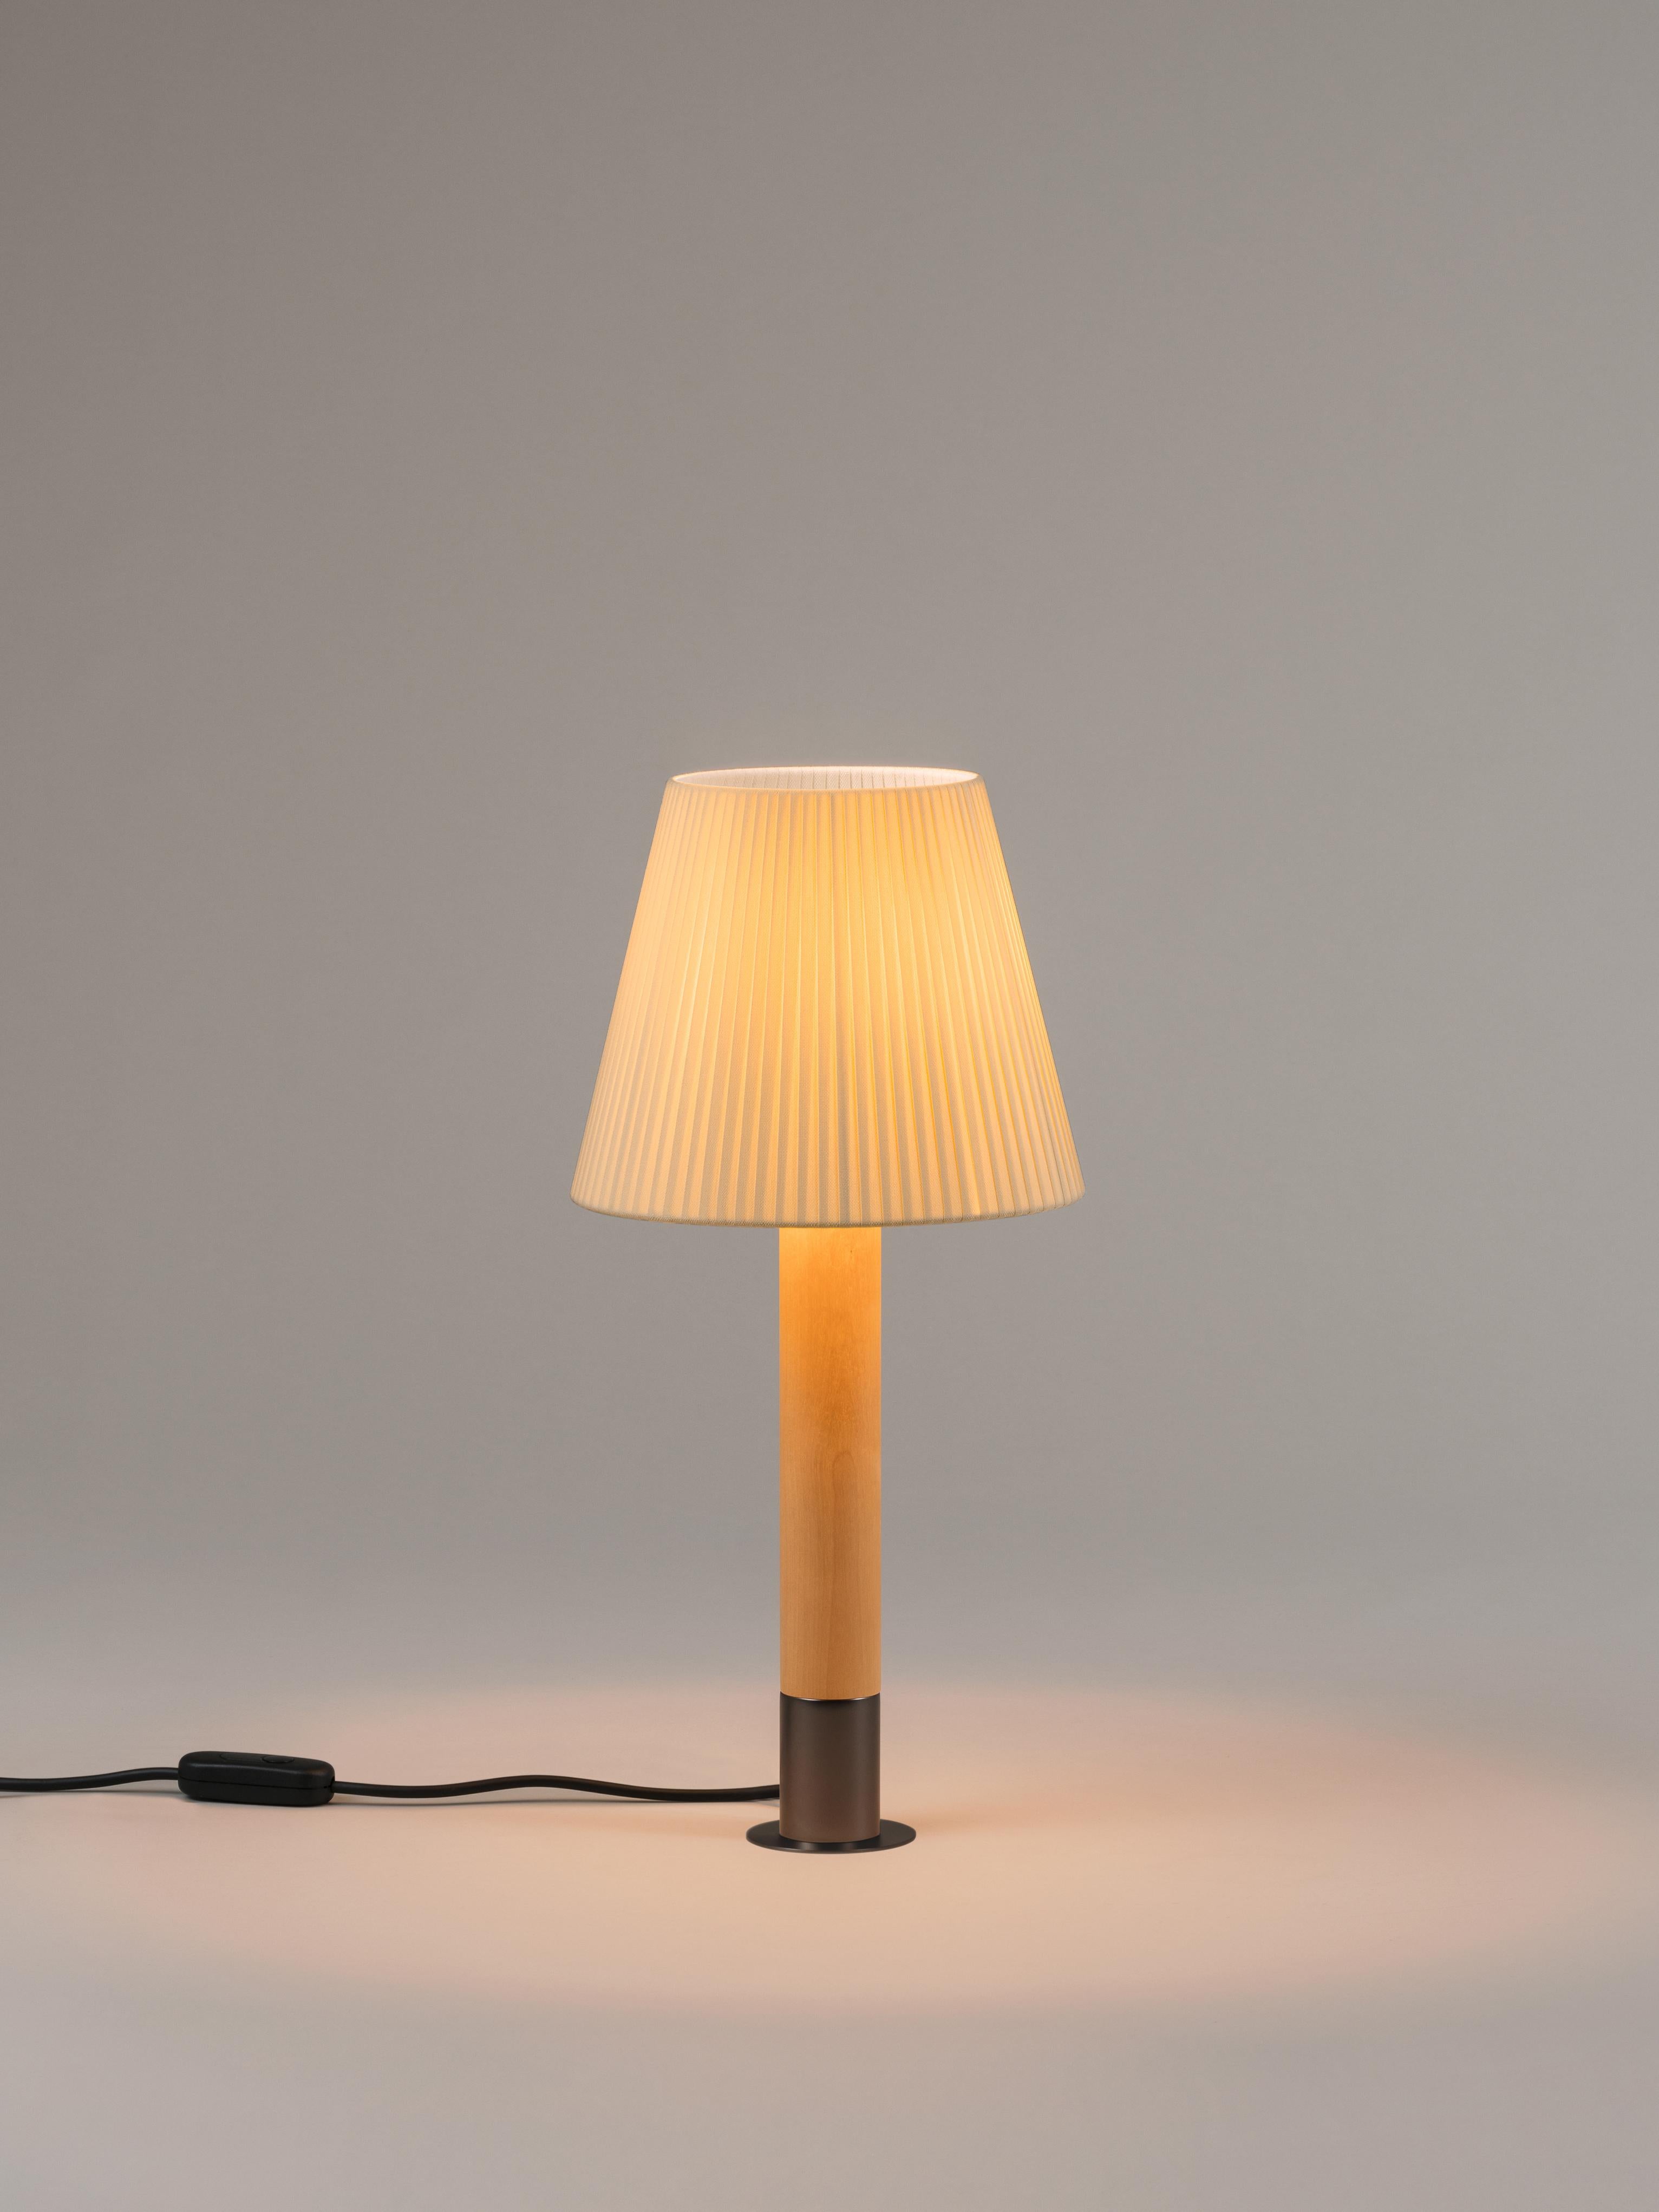 Bronze and Natural Básica M1 table lamp by Santiago Roqueta, Santa & Cole.
Dimensions: D 25 x H 52 cm
Materials: Bronze, birch wood, ribbon.
Available in other shade colors and with or without the stabilizing disc.
Available in nickel or